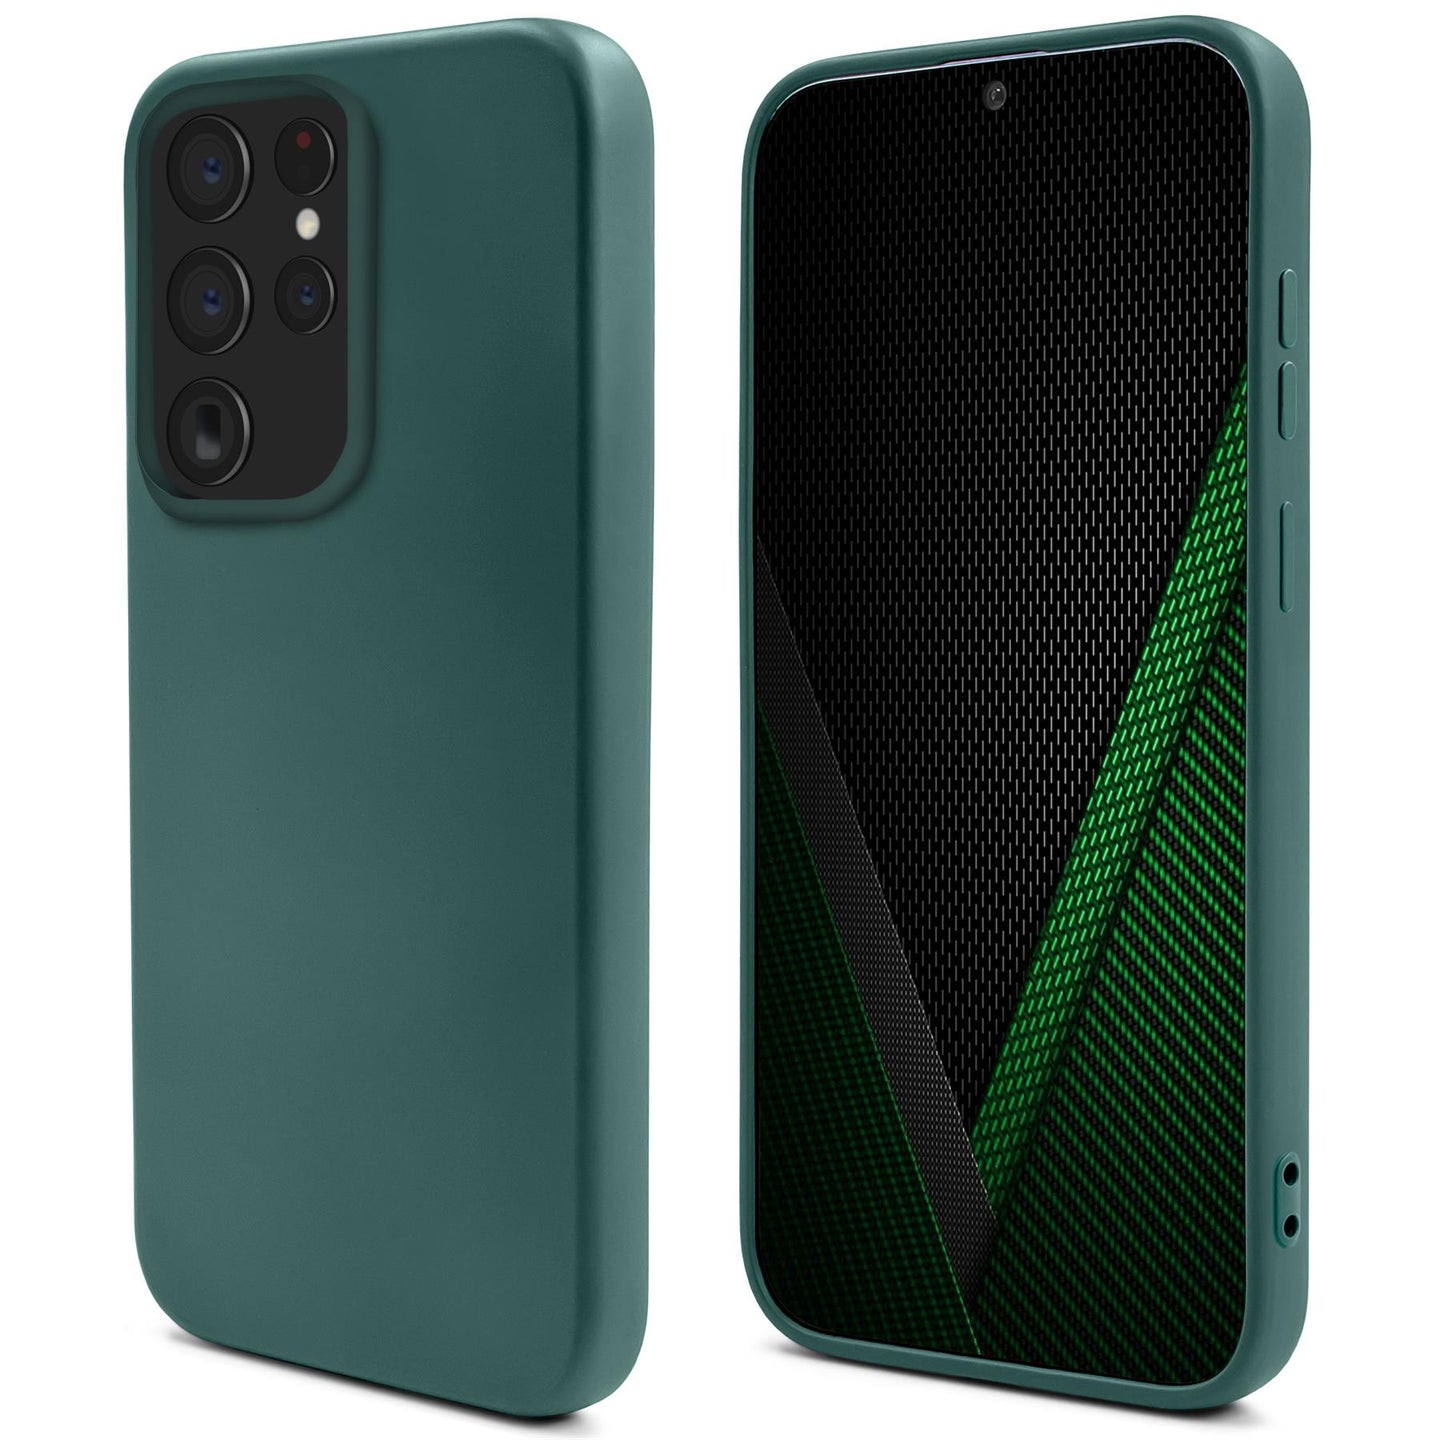 Moozy Lifestyle. Silicone Case for Samsung S22 Ultra, Dark Green - Liquid Silicone Lightweight Cover with Matte Finish and Soft Microfiber Lining, Premium Silicone Case